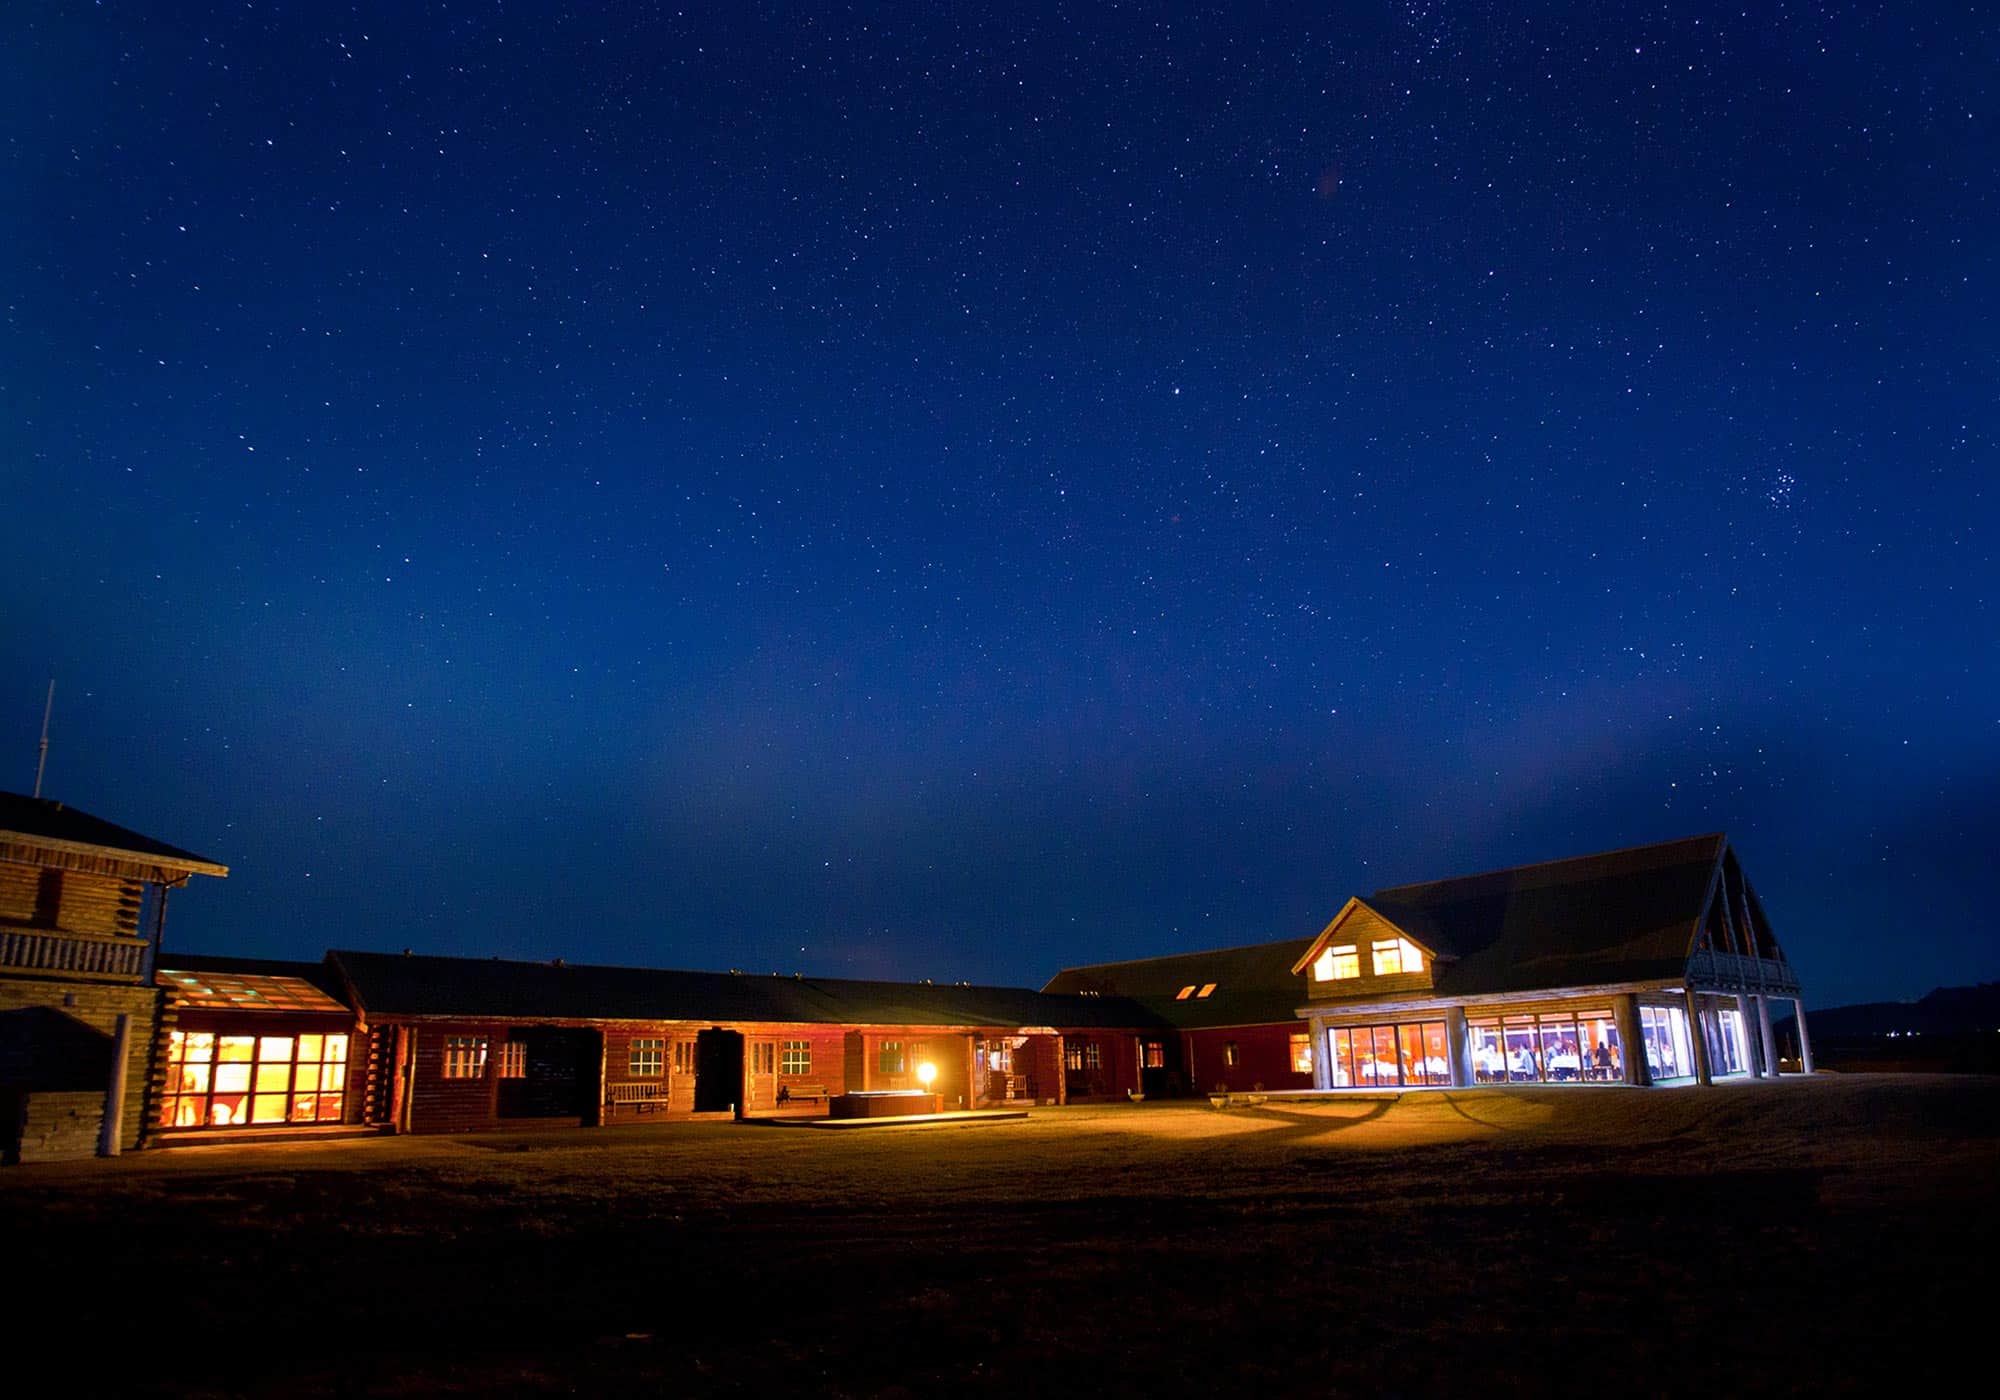 Hotel Rangá luxury hotel underneath a starry night sky in south Iceland, perfect for stargazing.